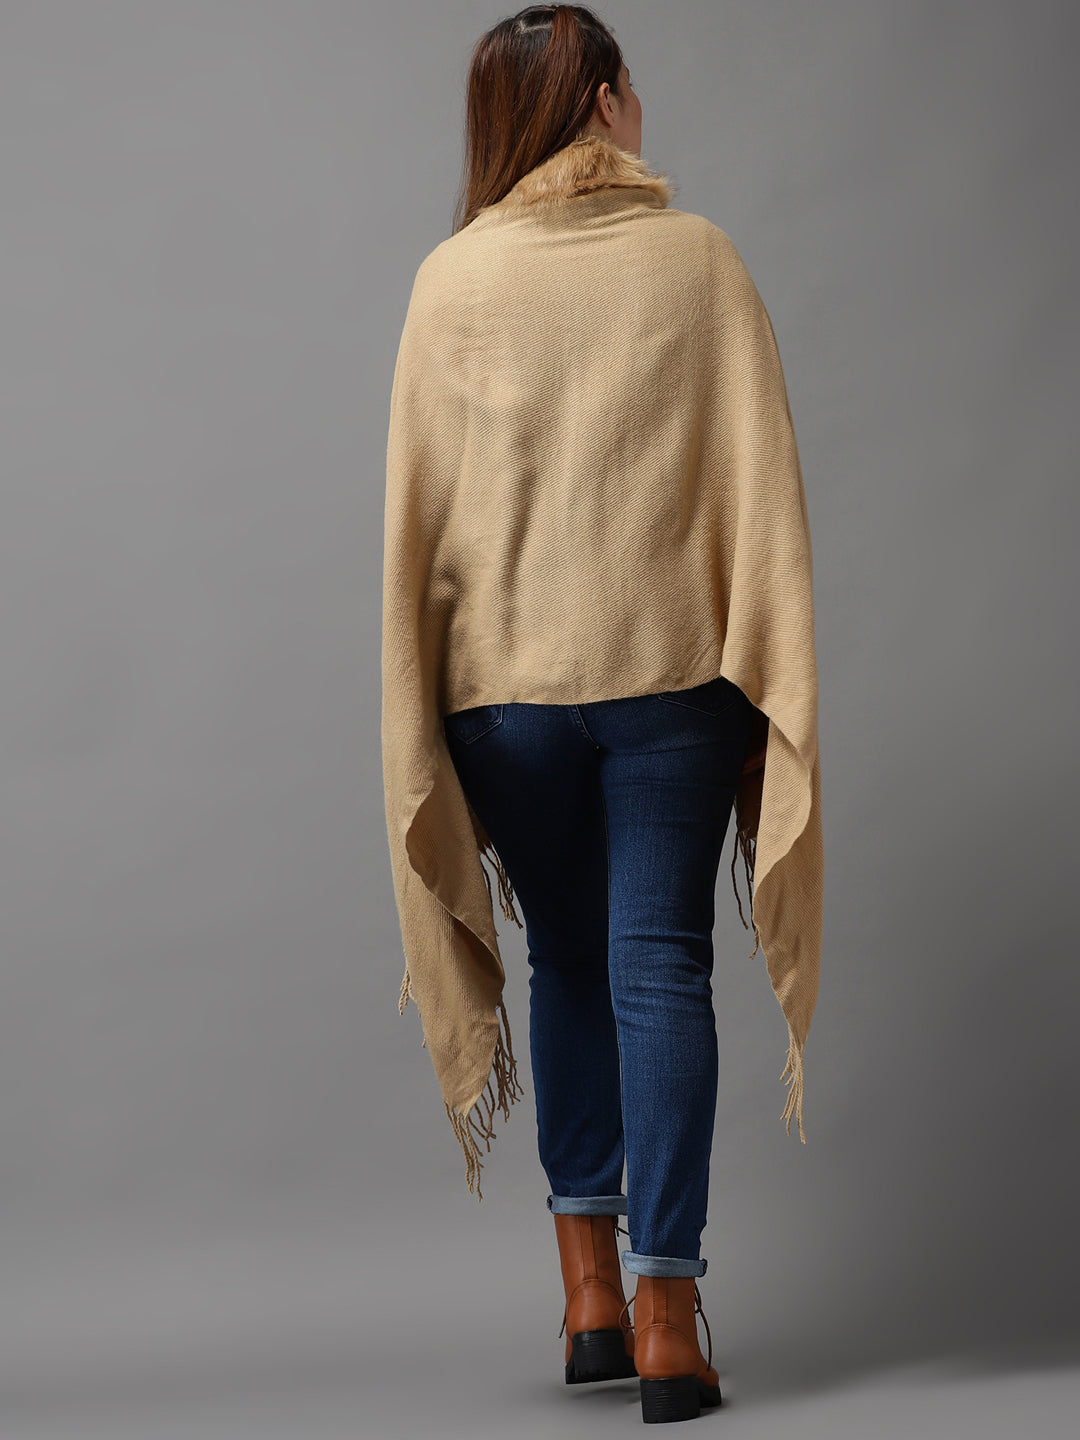 Women's Brown Solid Poncho Sweater